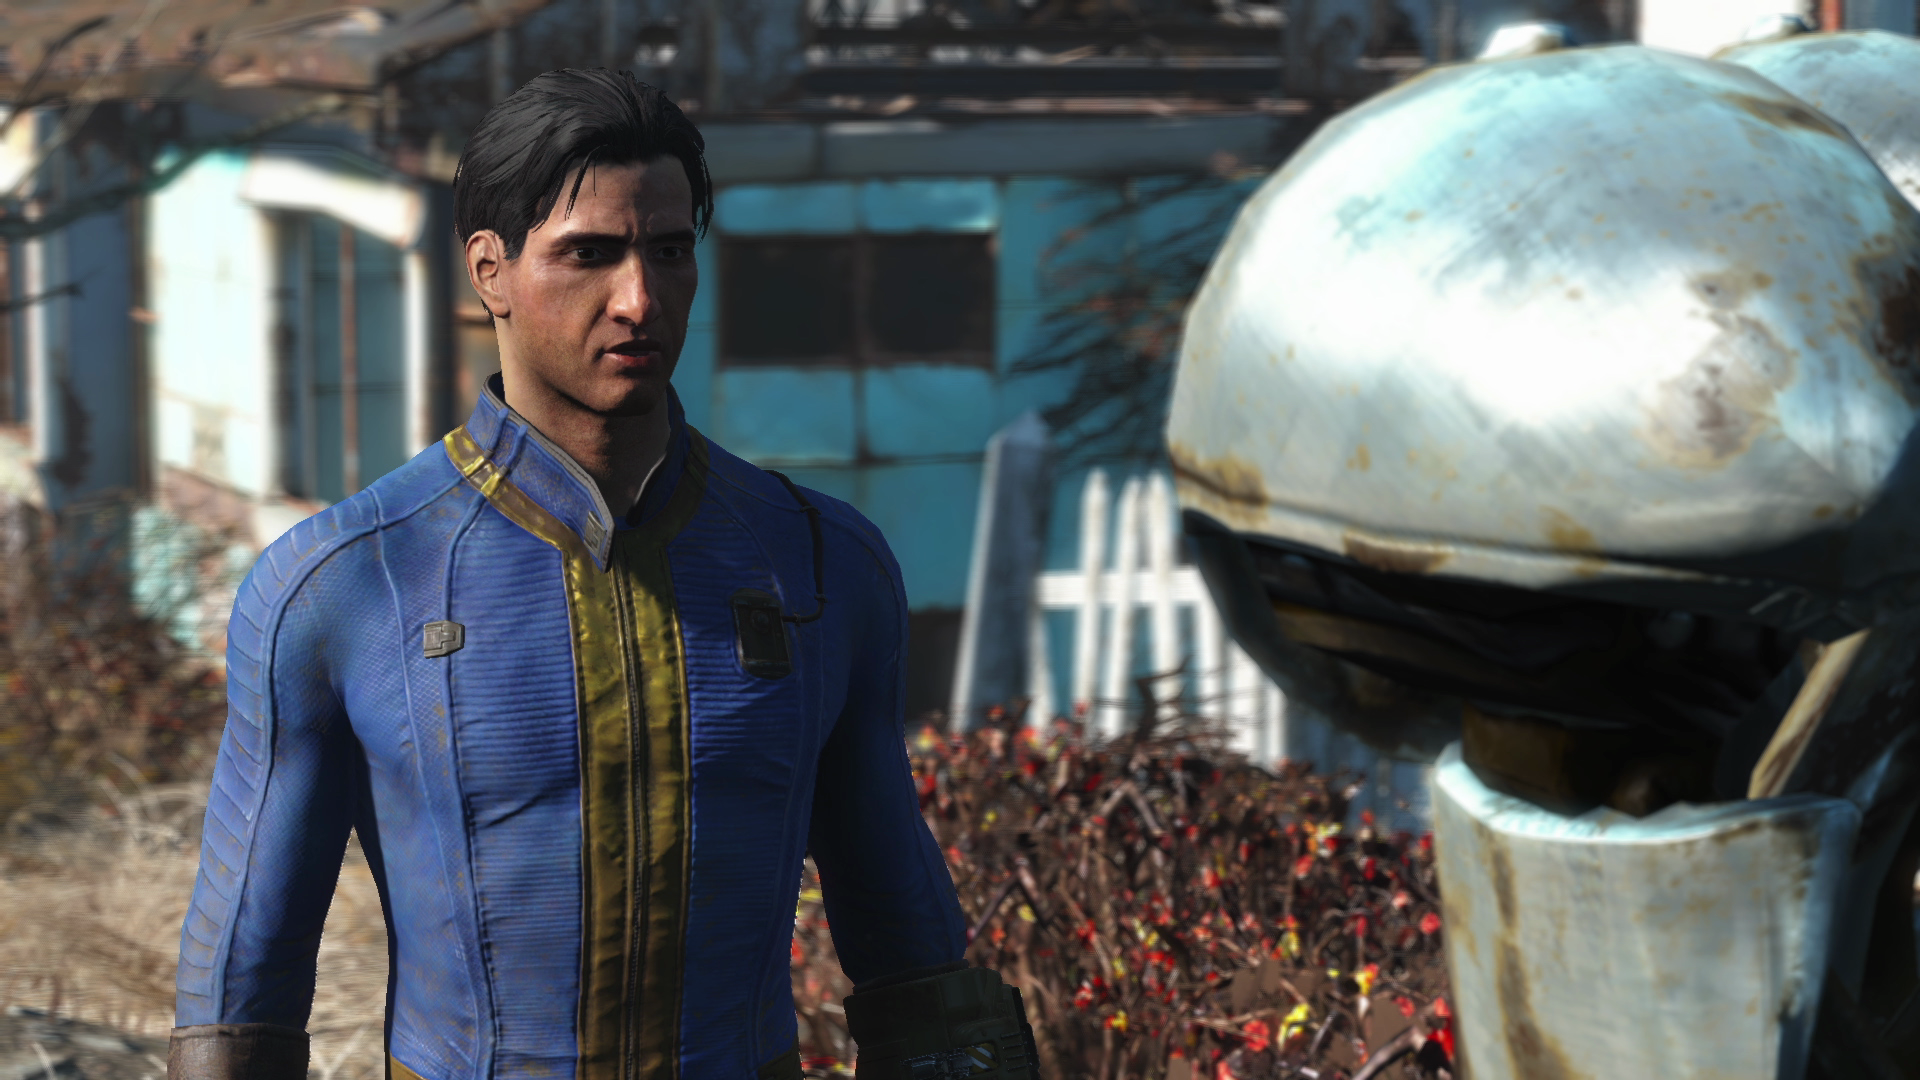 fallout 4 official release date set as 11 november 2015 here are 7 of the game s best new features image 1